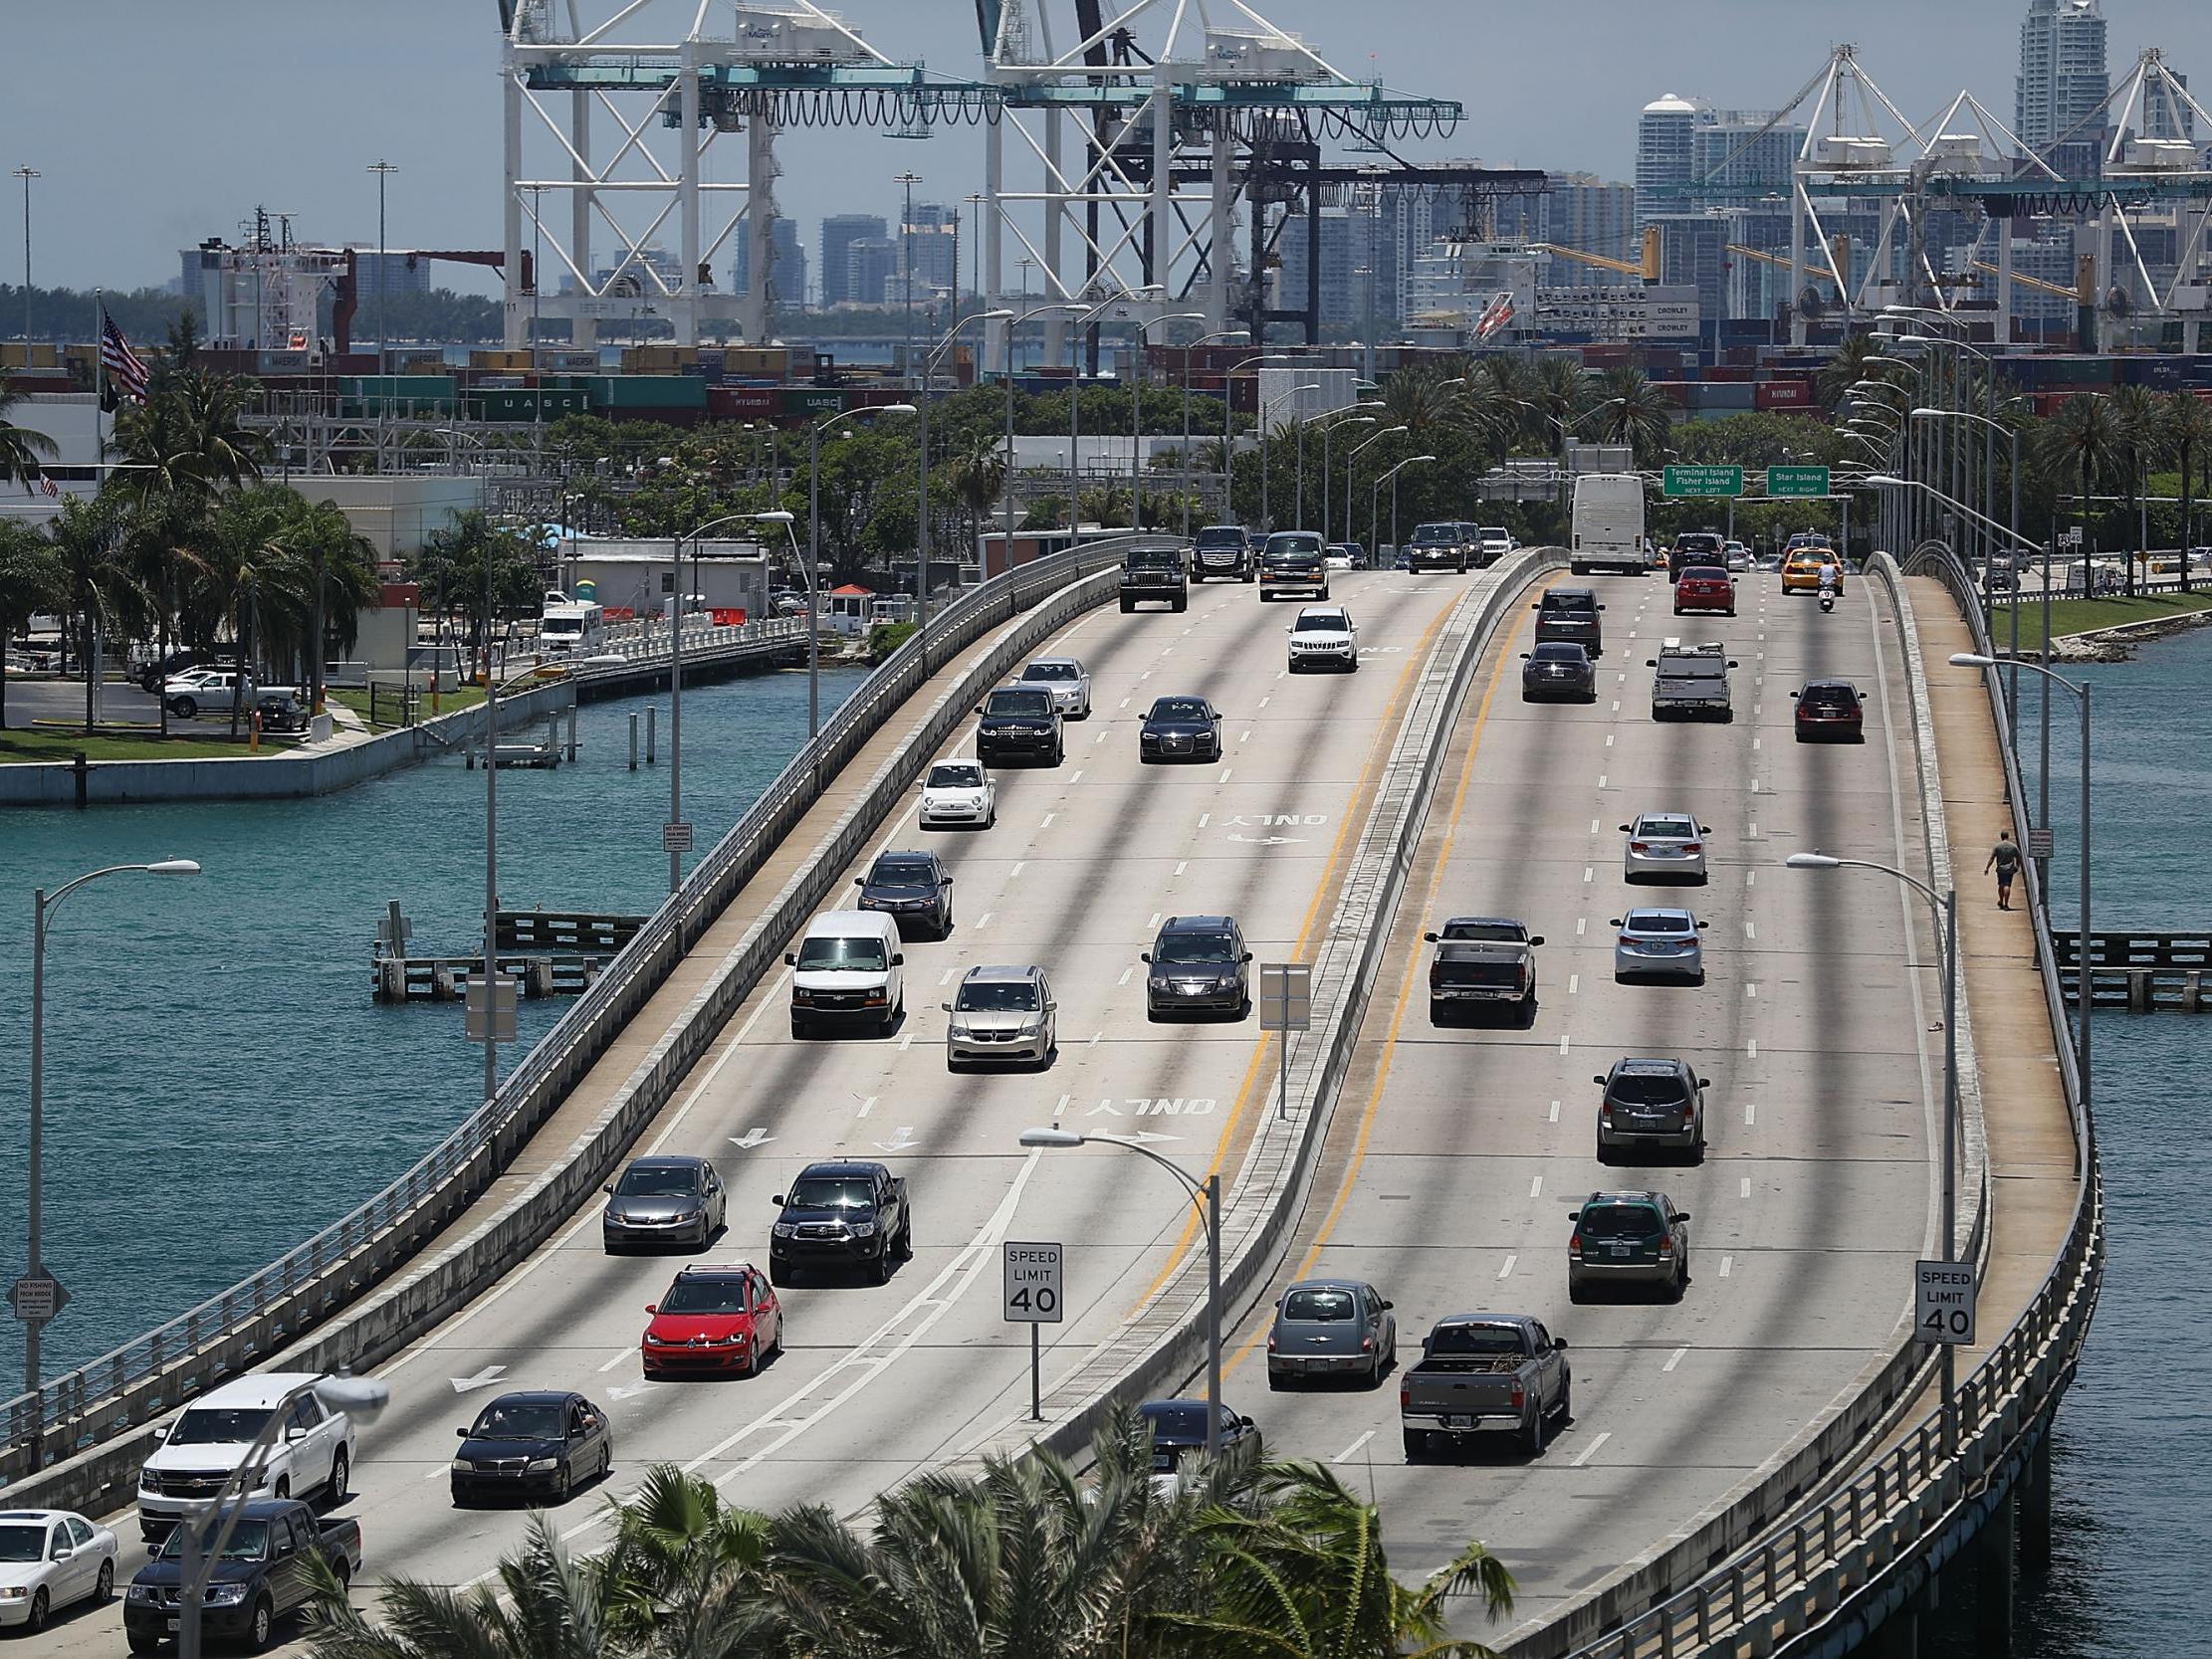 Miami is one of a number of cities that will face the effects of rising sea levels